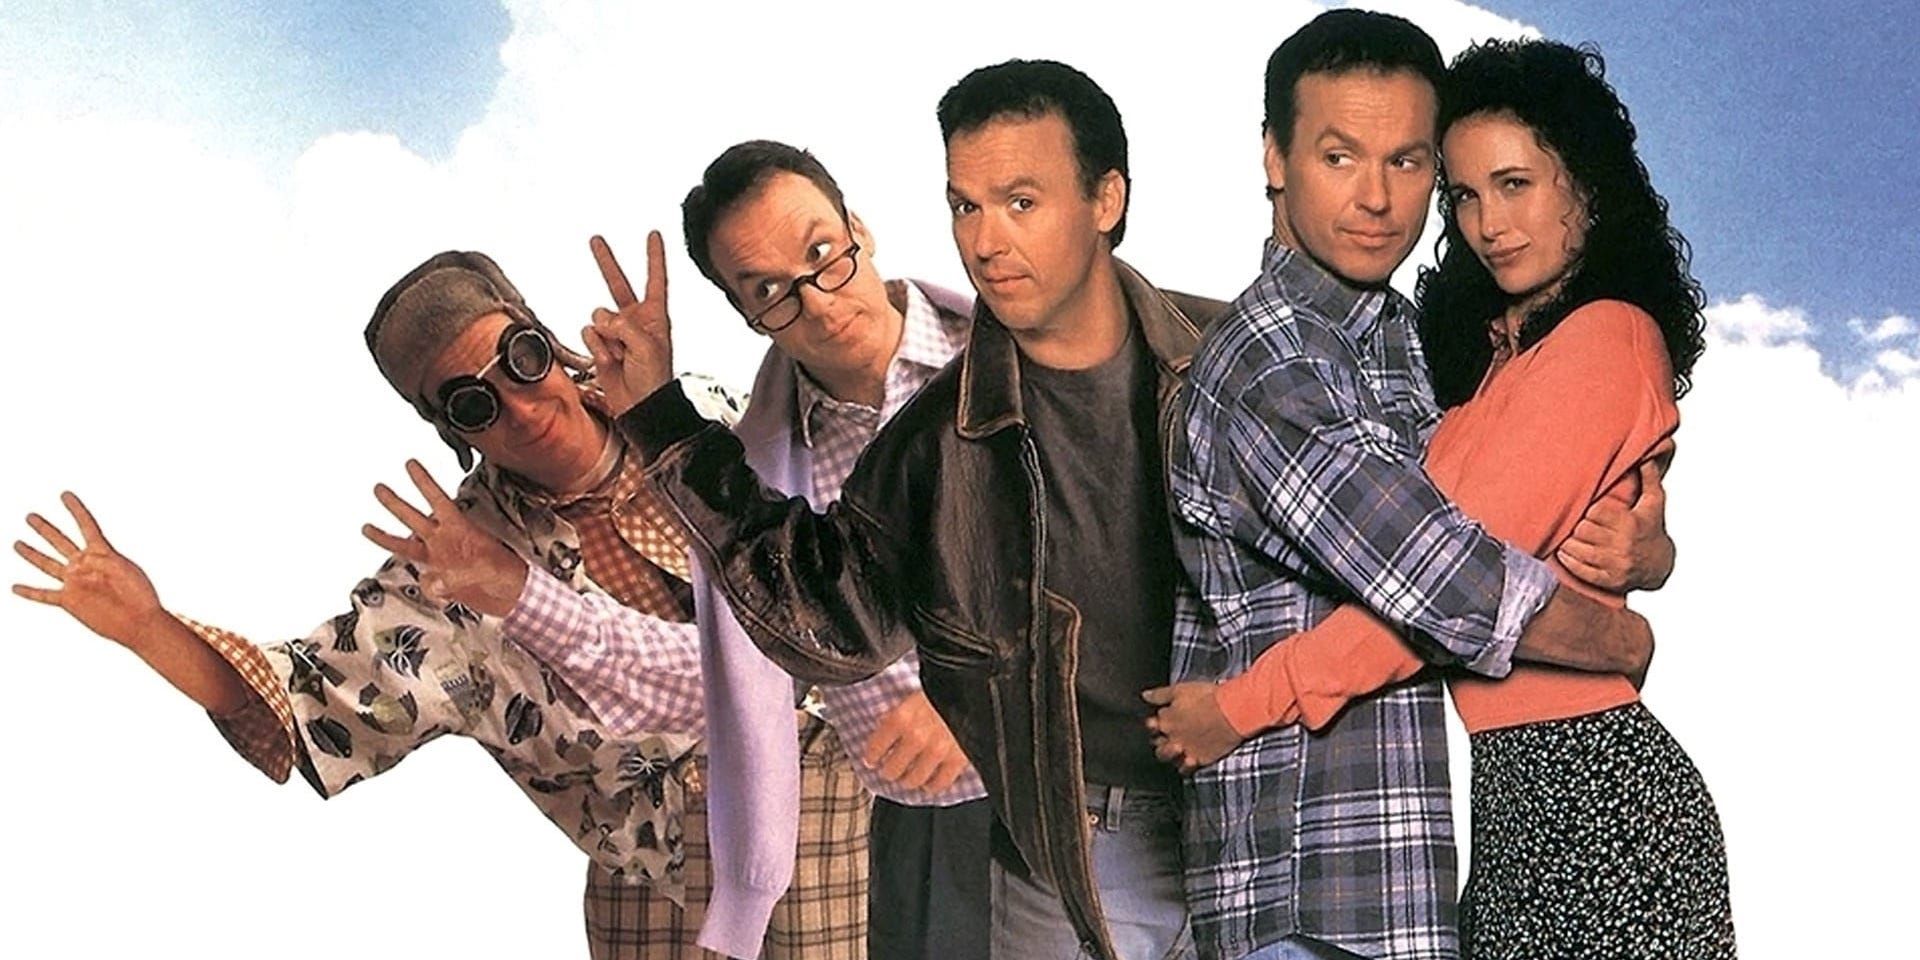 Michael Keaton's different versions on the Multiplicity poster